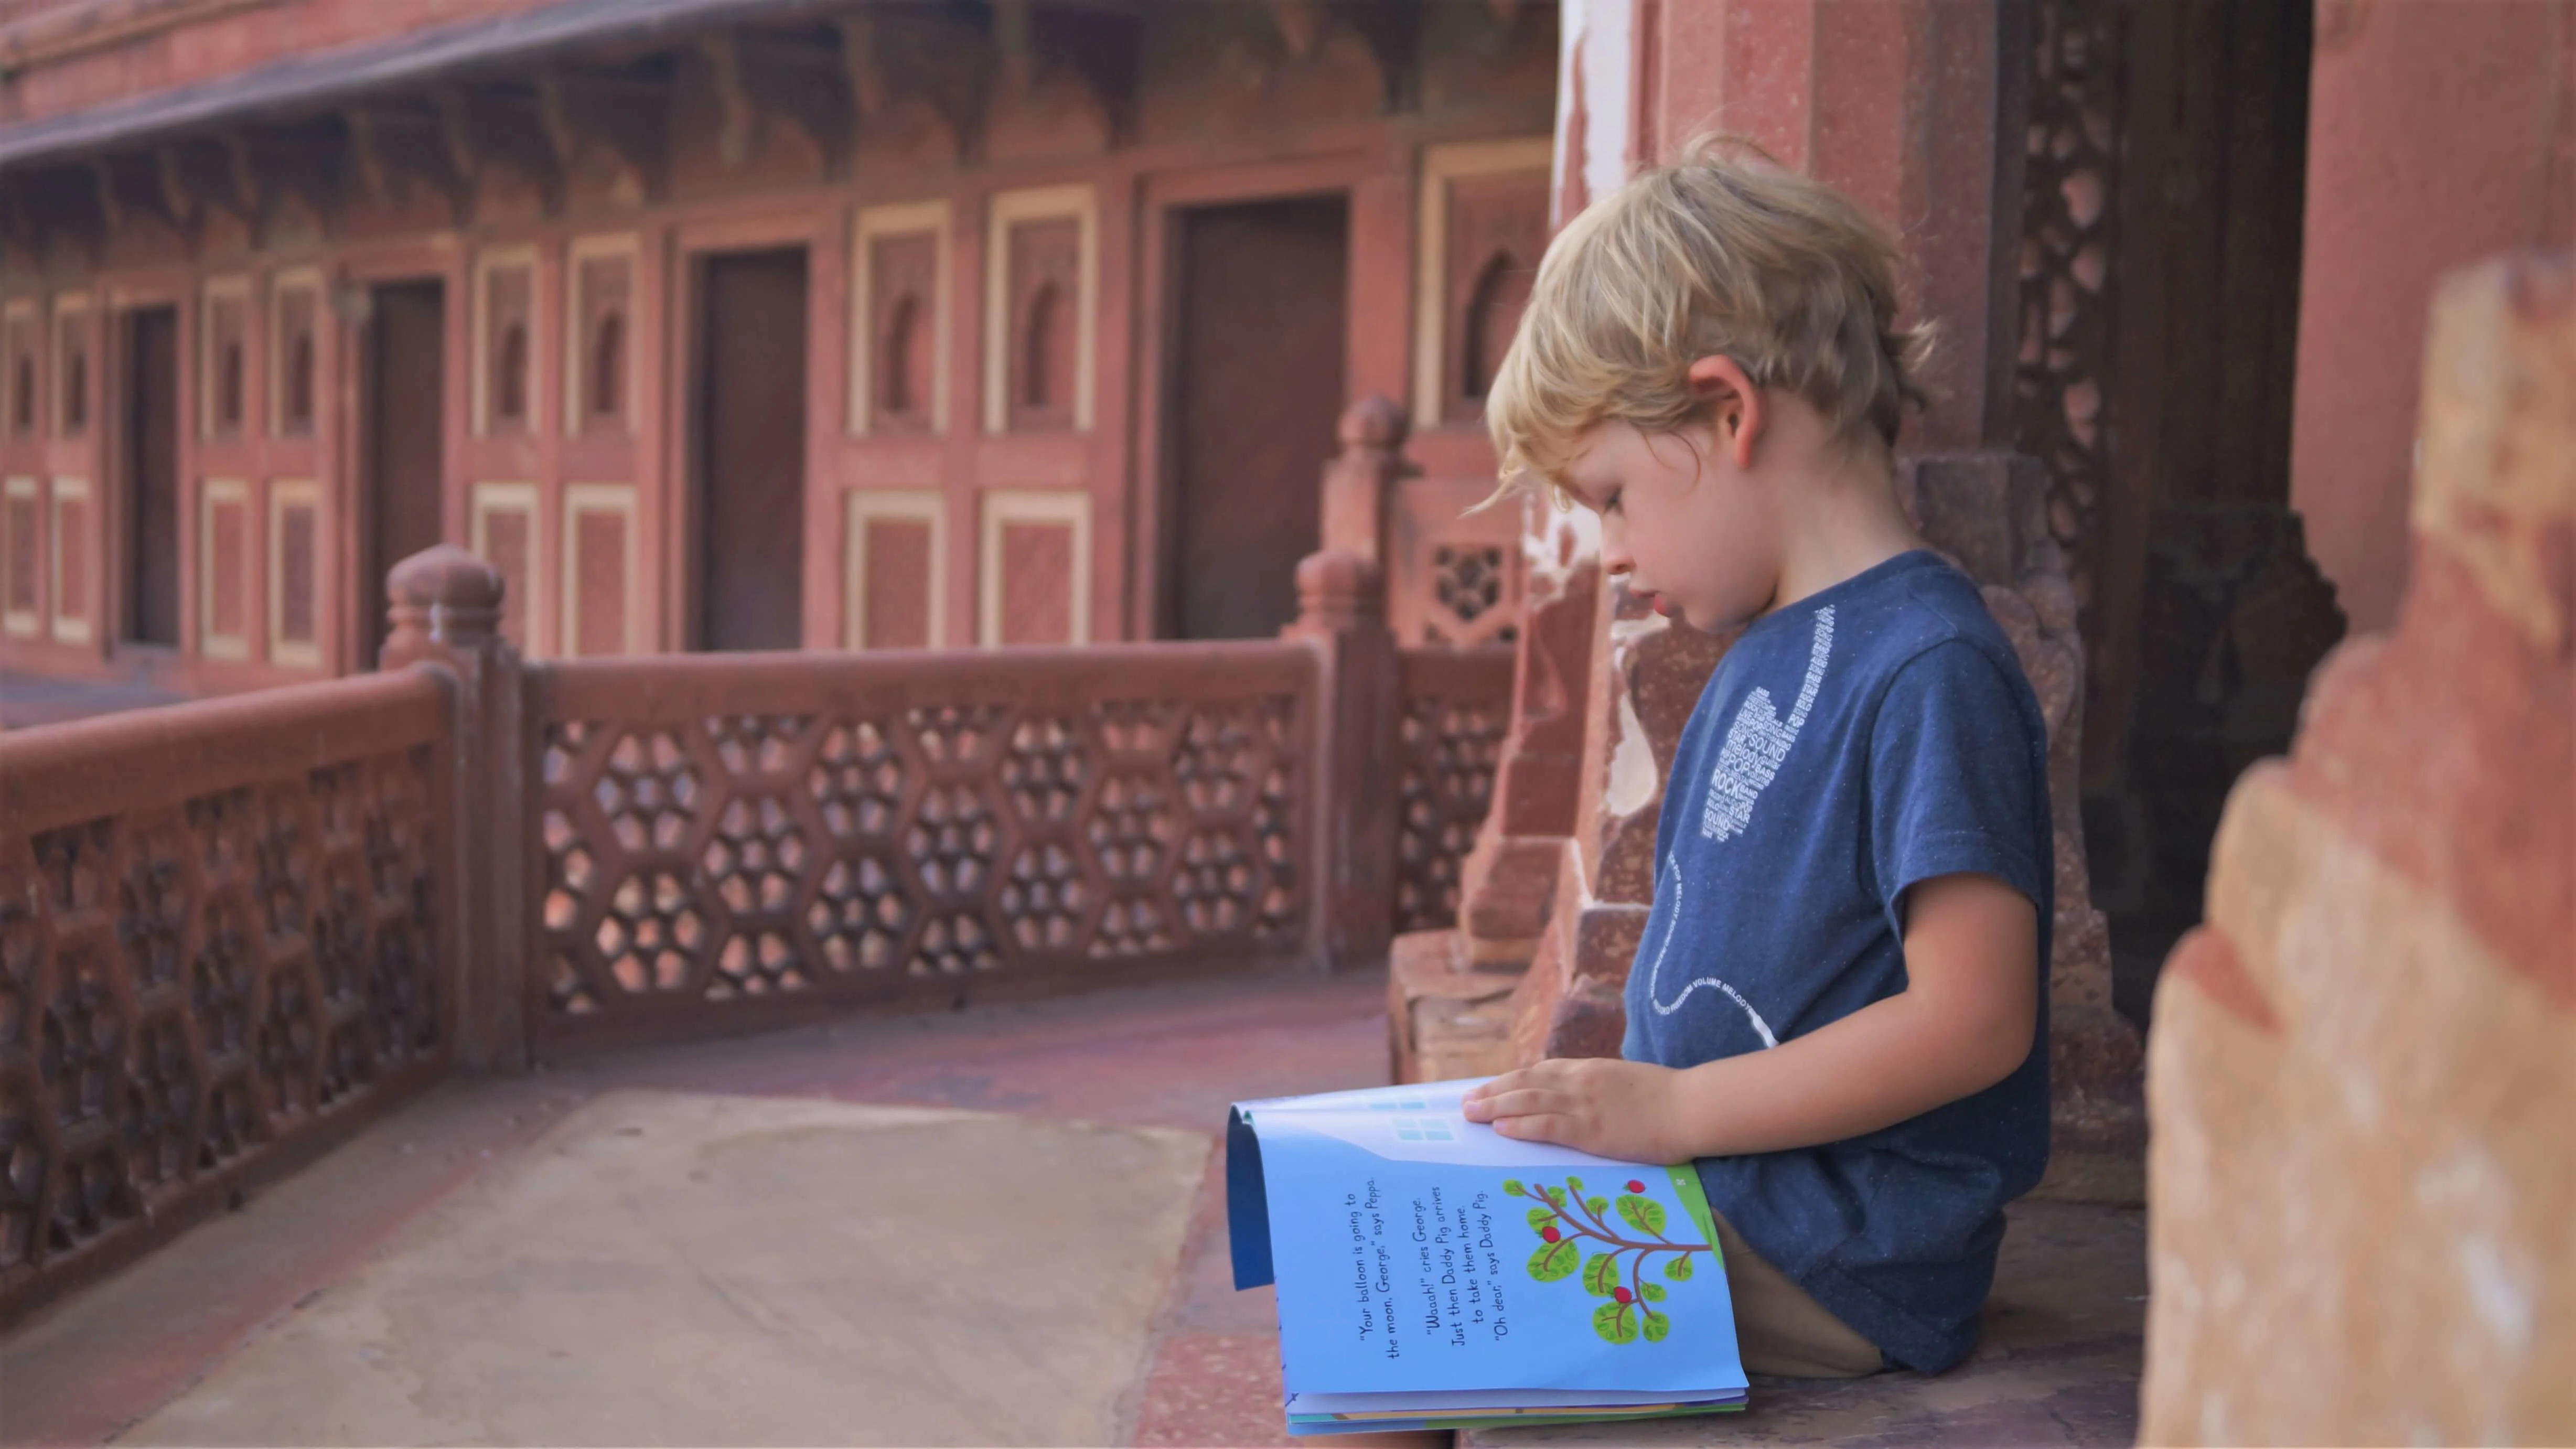 Travel stories for young kids: 10 travel inspiring books for the under-5s